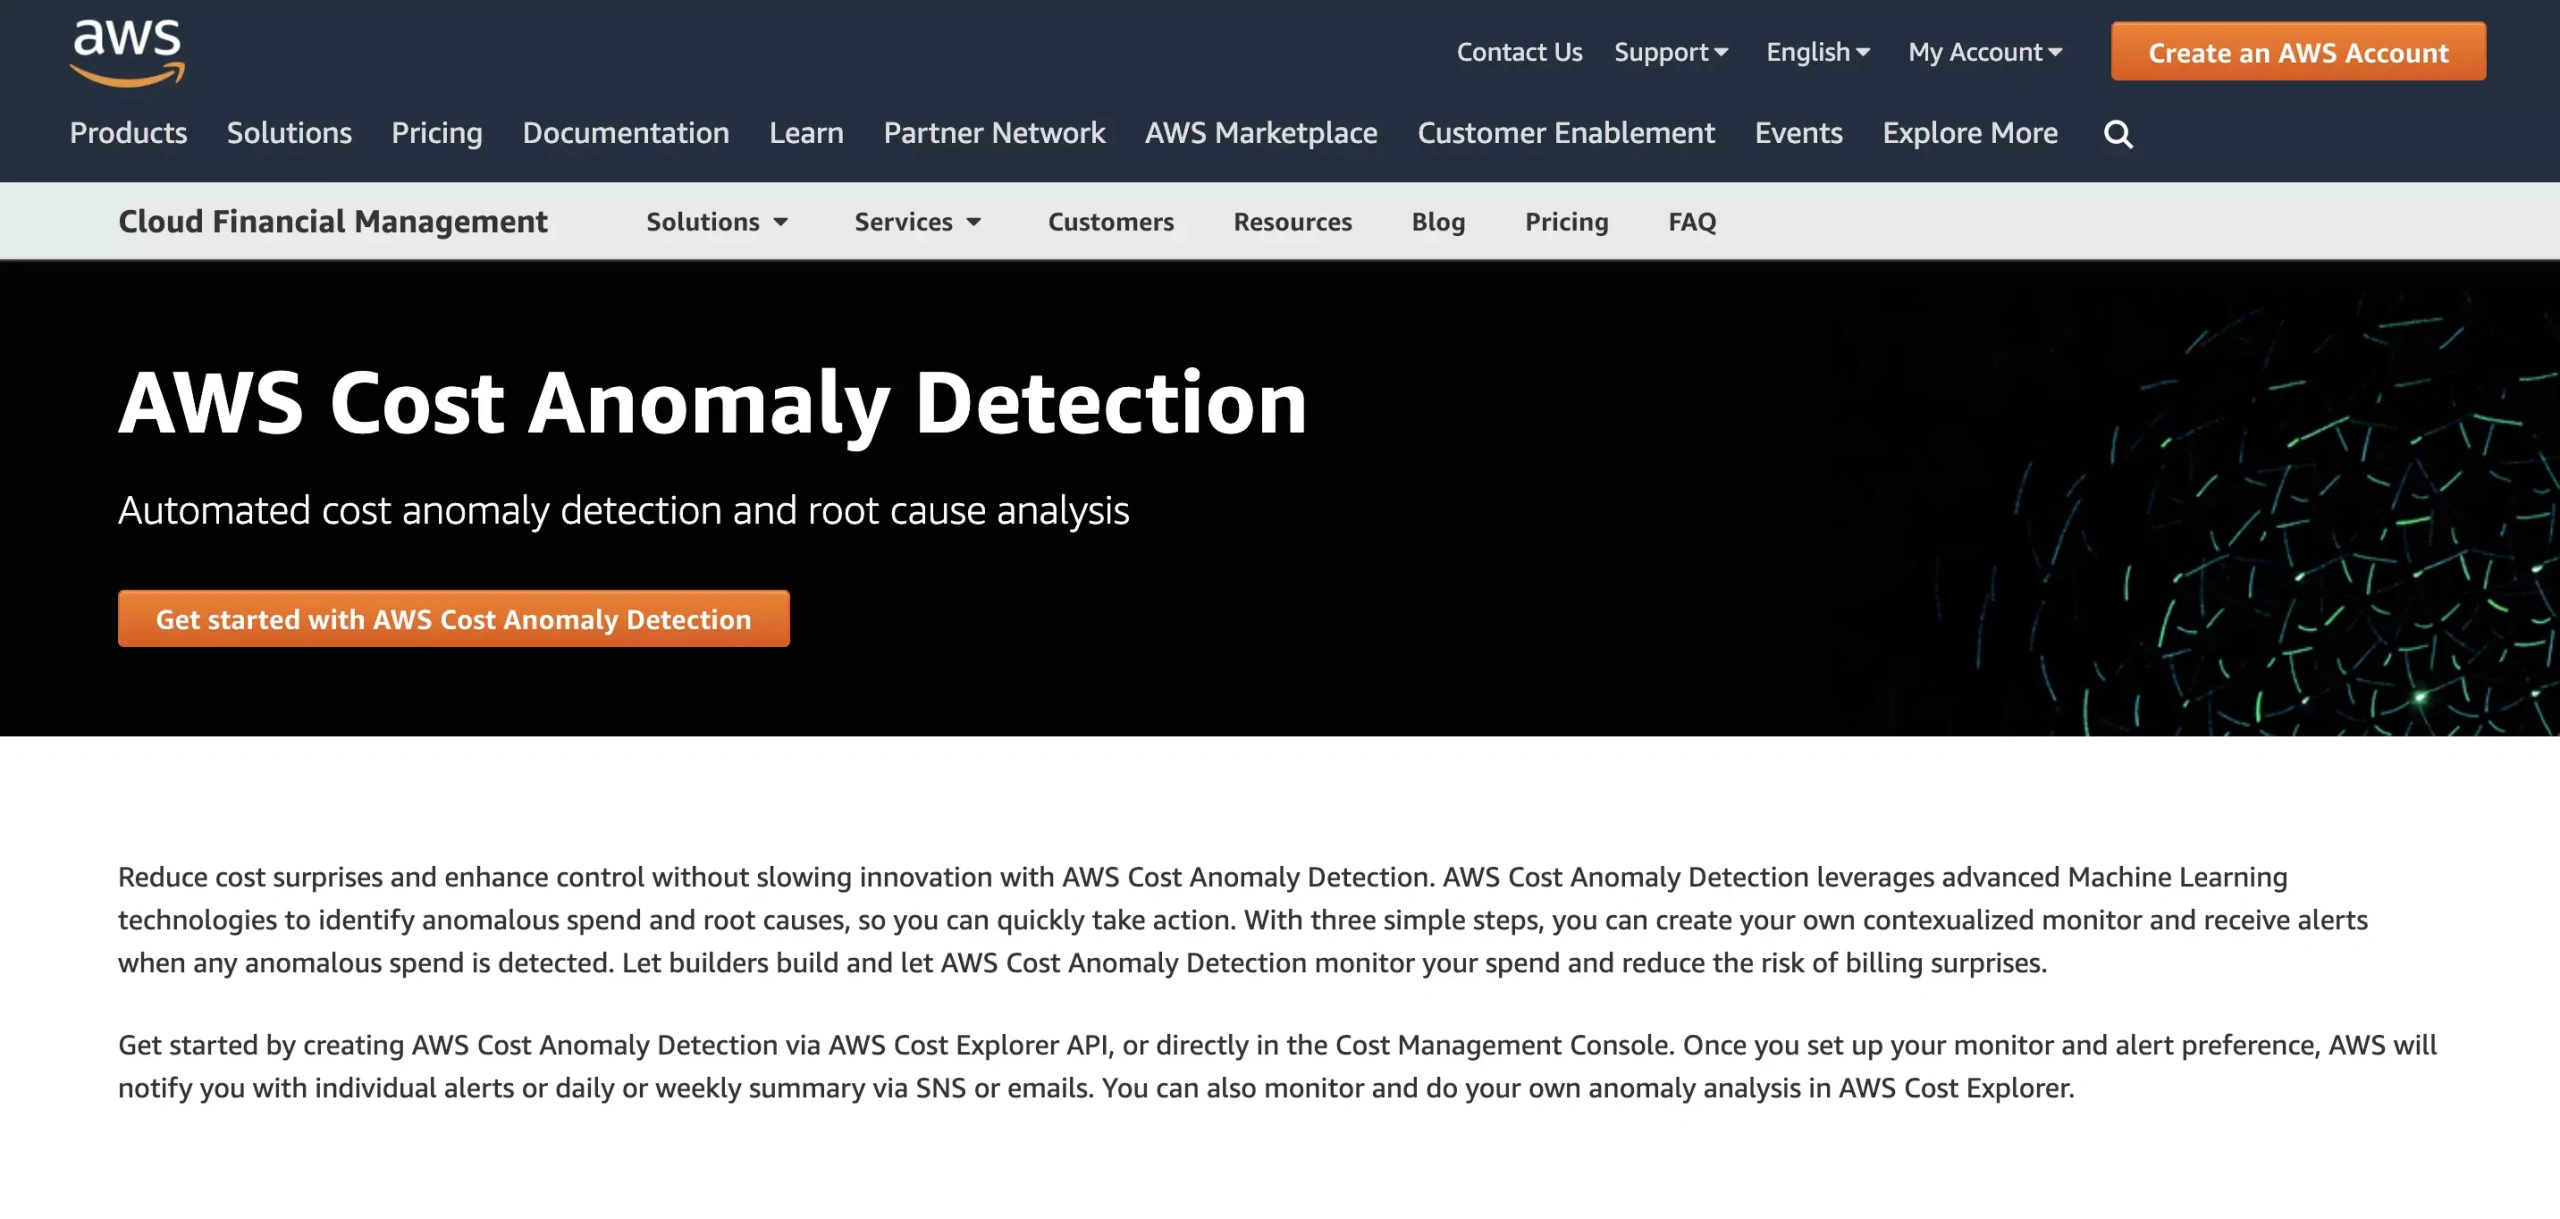 AWS Cost Anomaly Detection